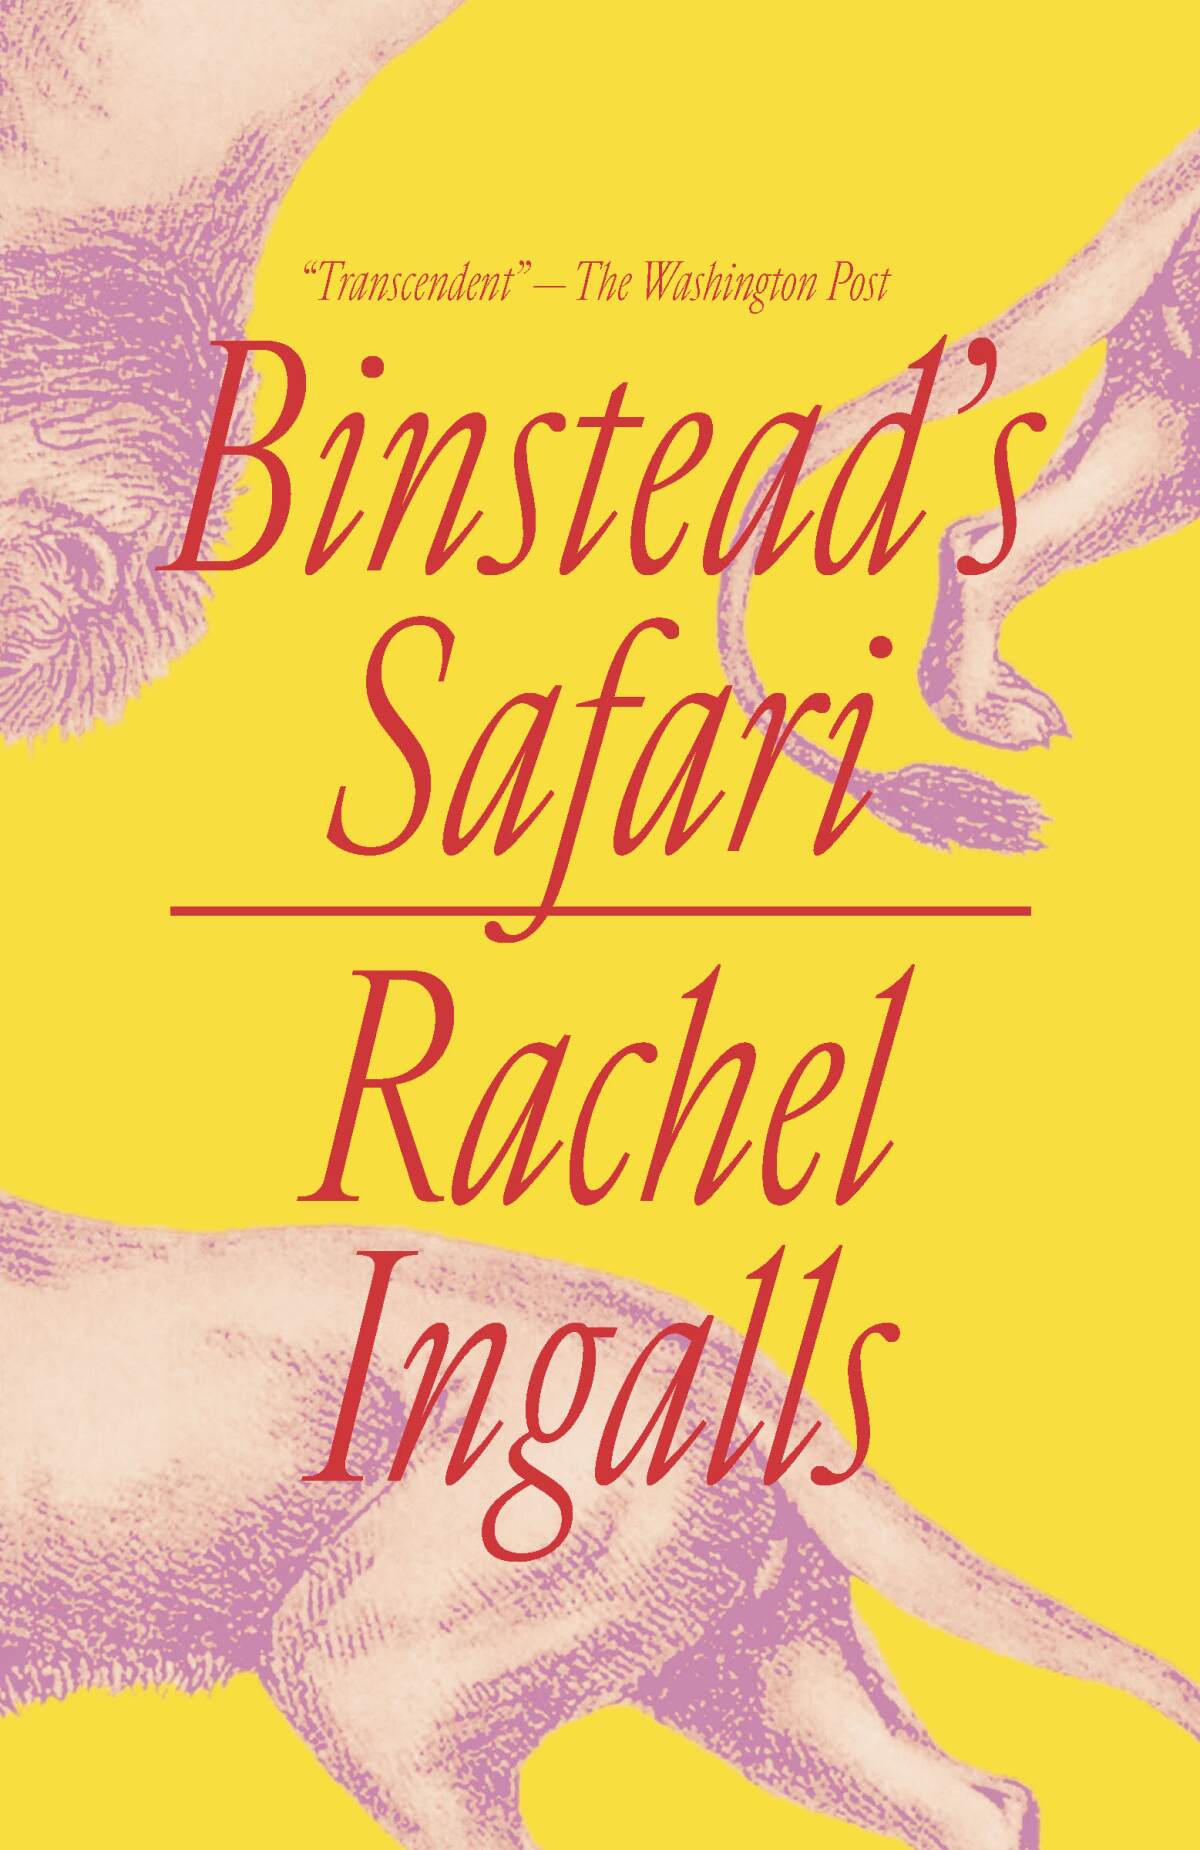 The book cover for "Binstead's Safari," by Rachel Ingalls, is yellow with partial photos of lions